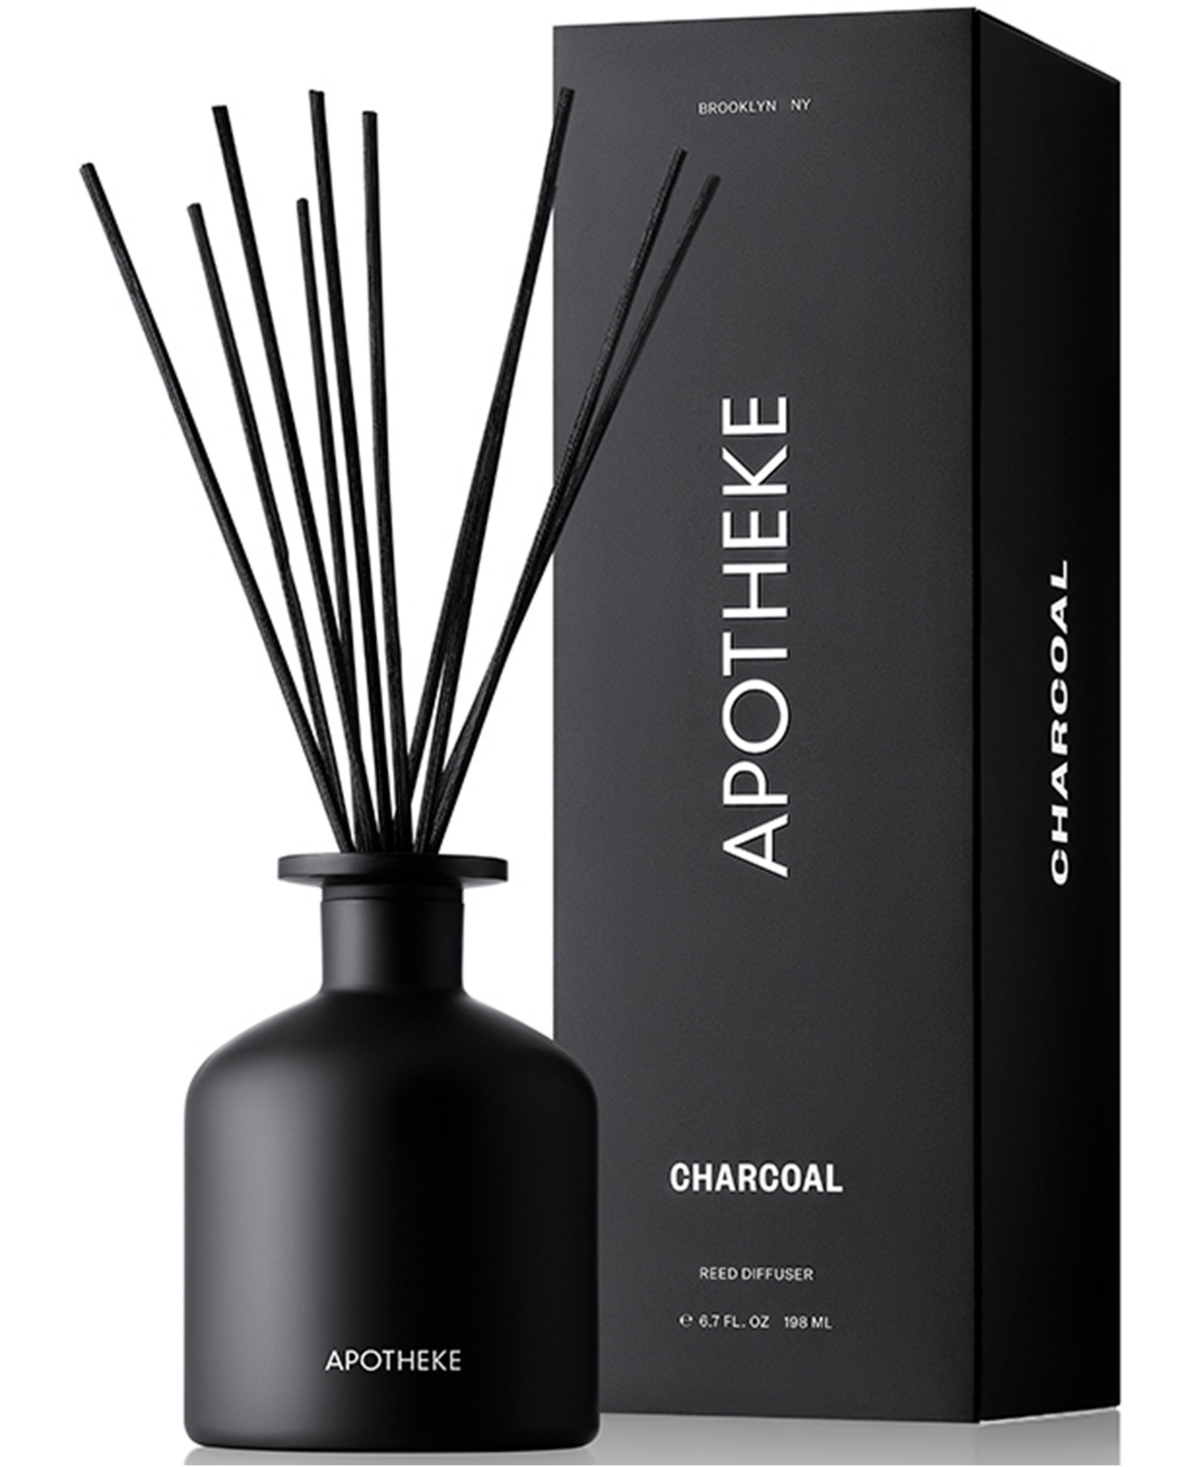 Charcoal Reed Diffuser, 6.7-oz.